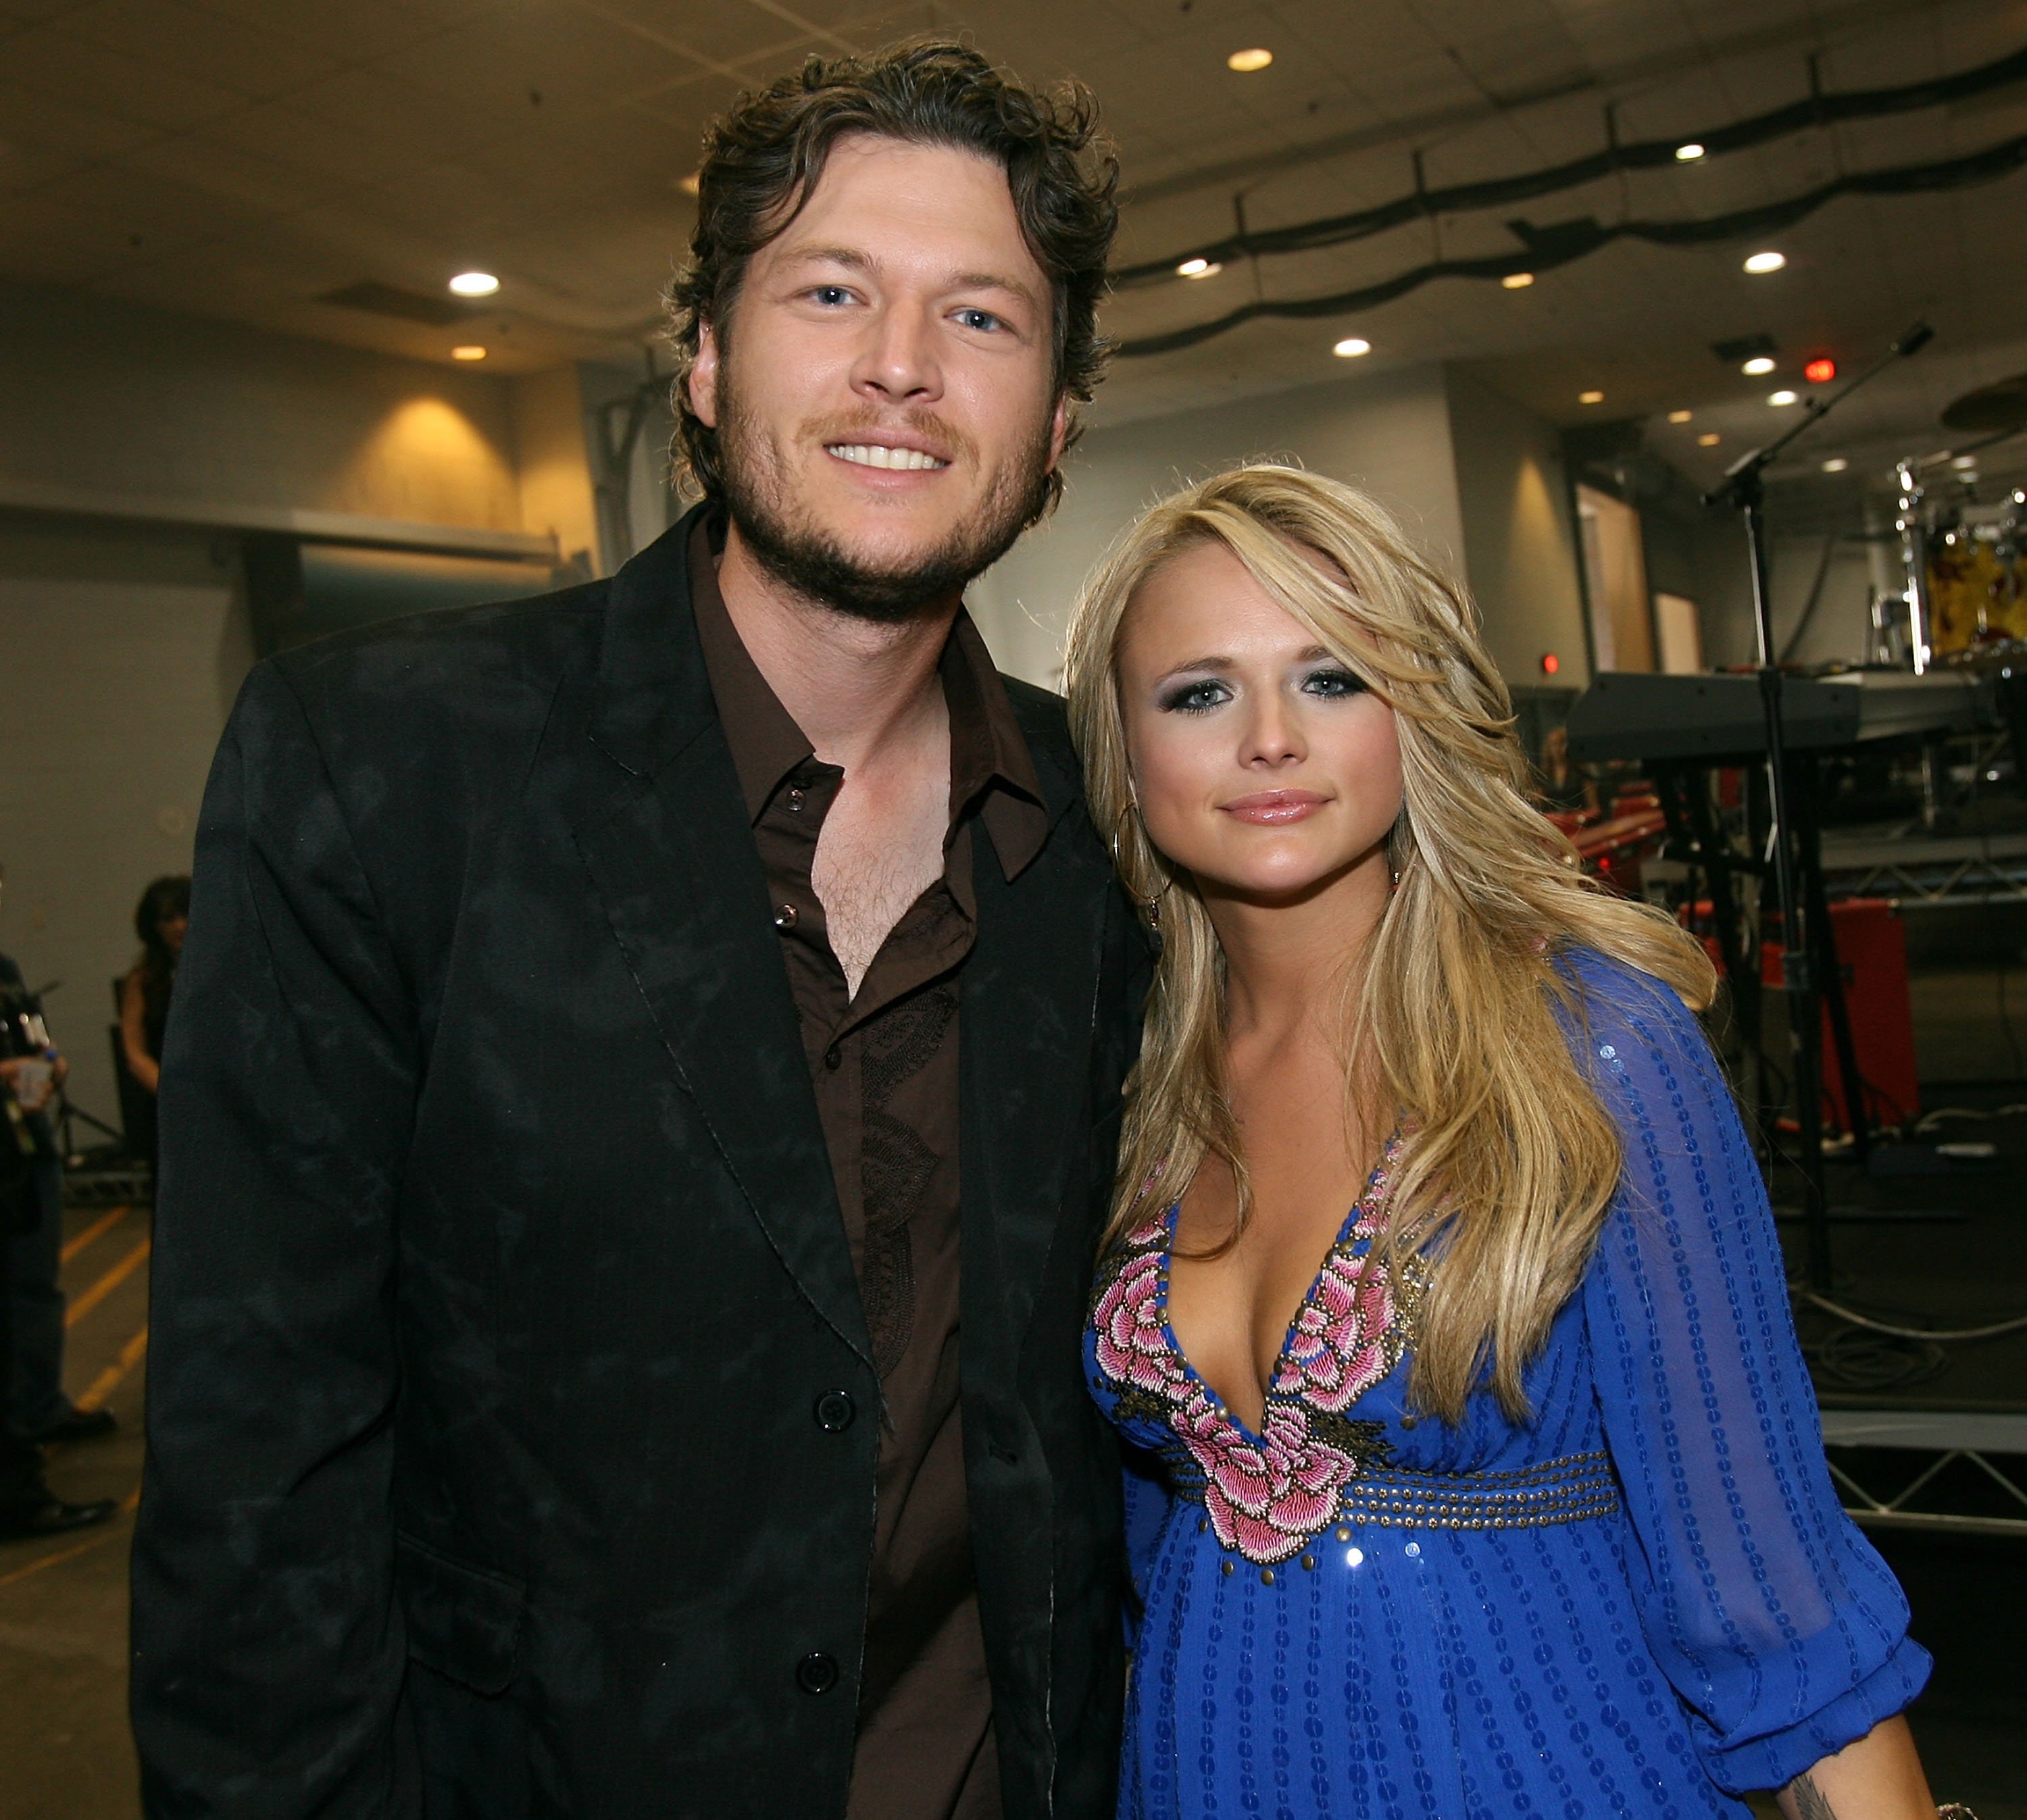 Blake Shelton and Miranda Lambert pose backstage at the 42nd Annual Academy Of Country Music Awards held at the MGM Grand Garden Arena on May 15, 2007 | Photo: GettyImages